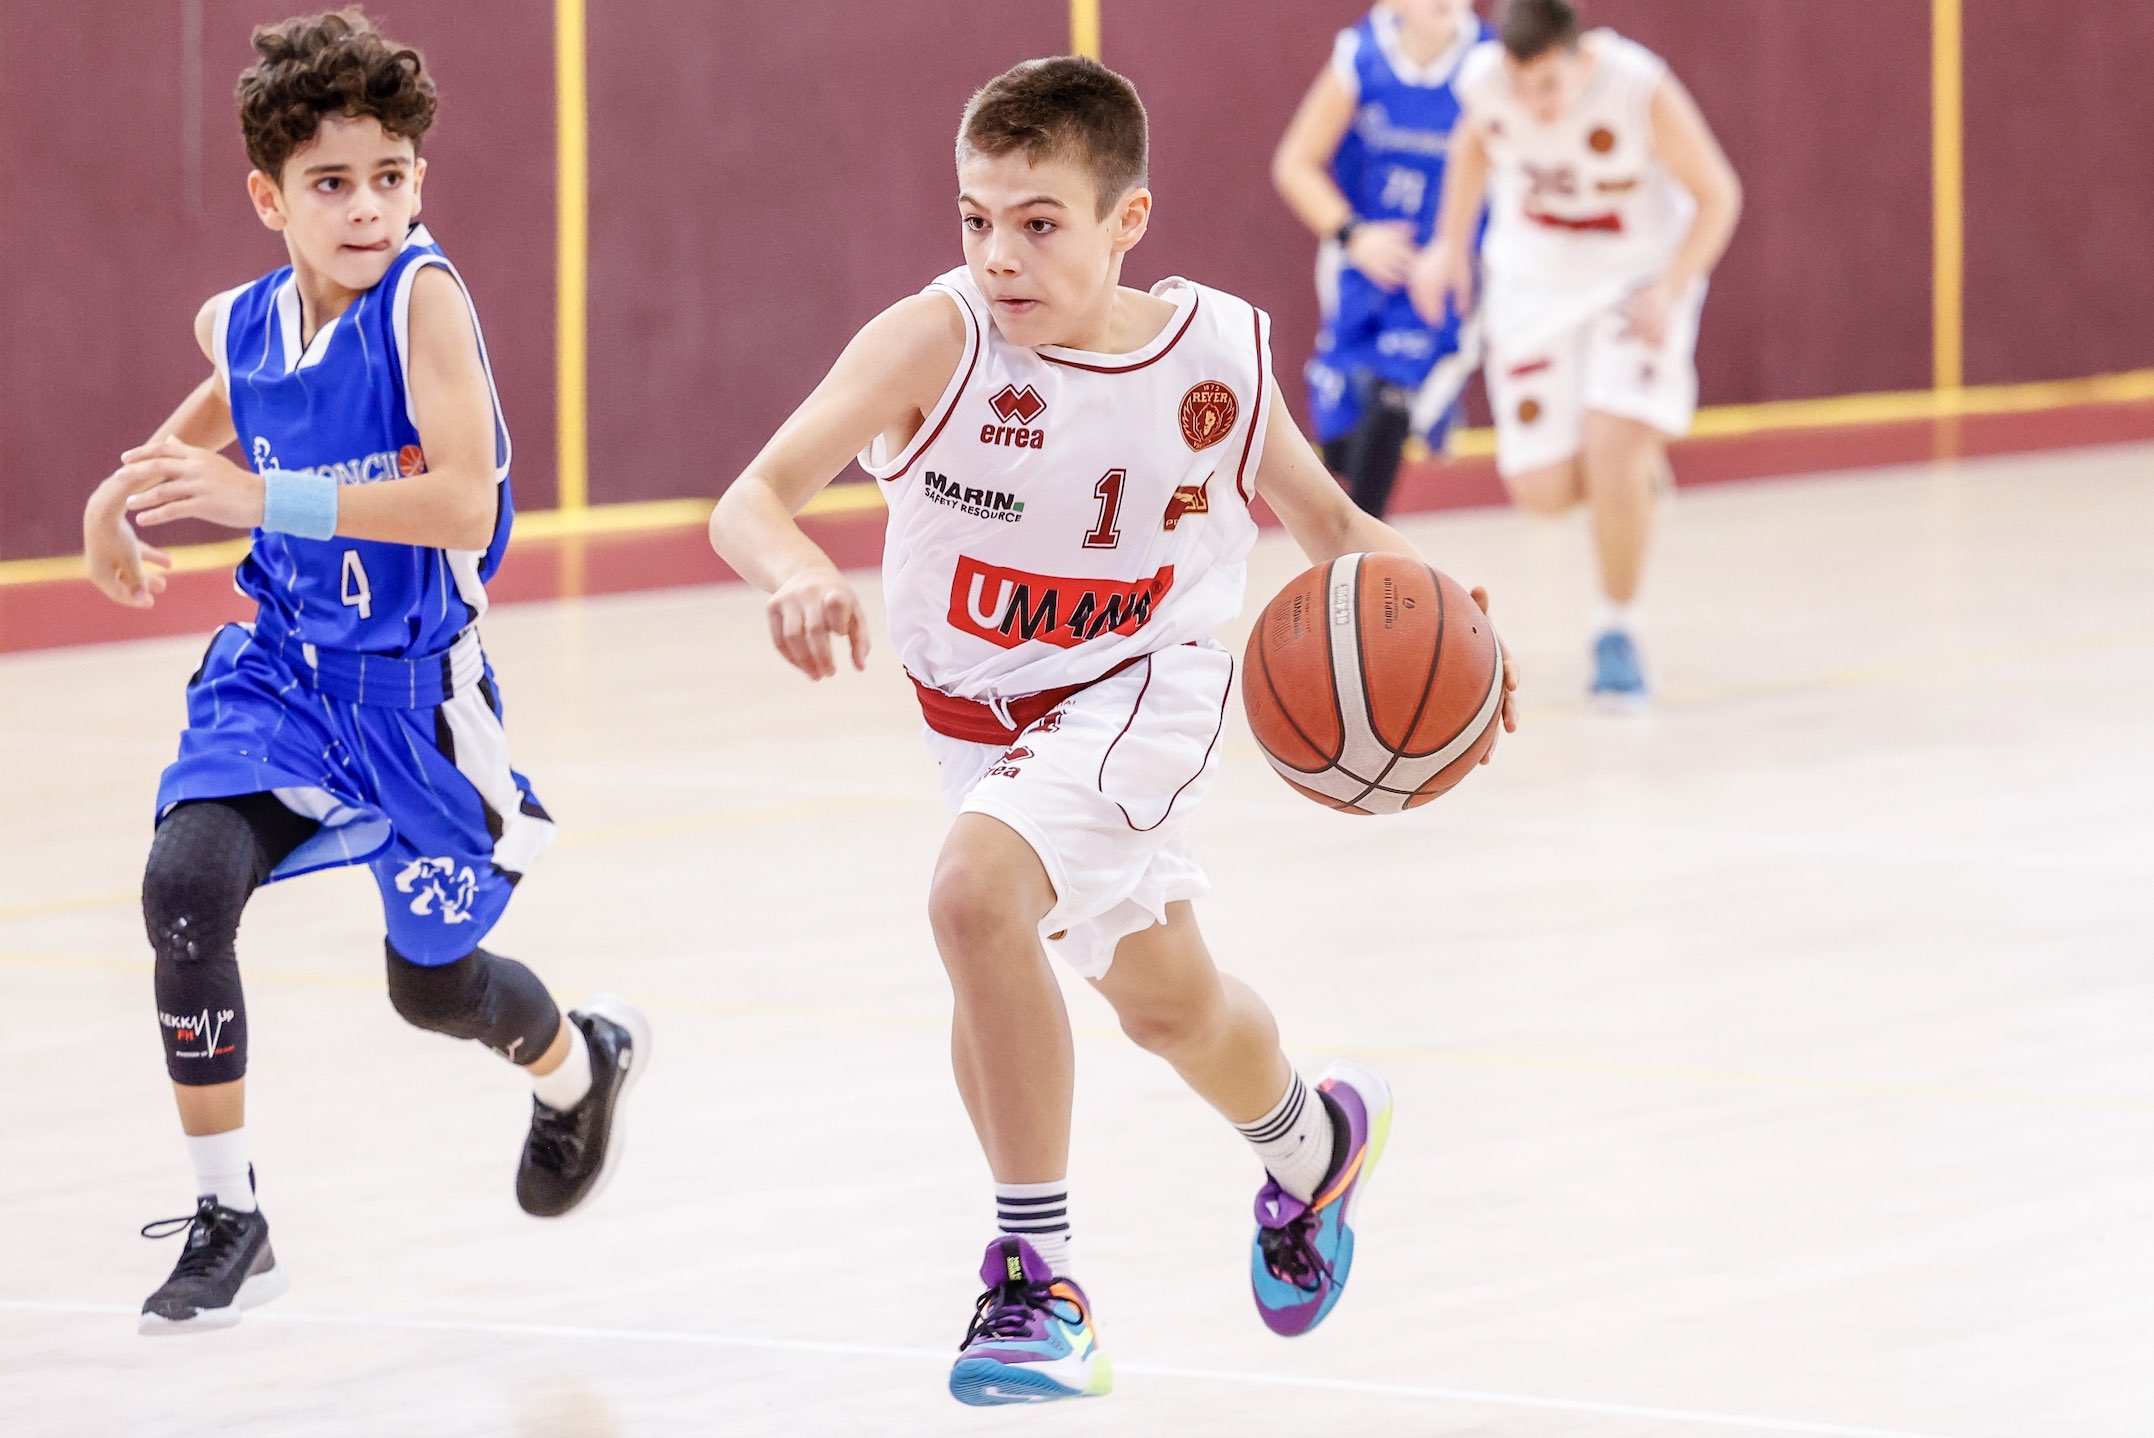 Under 13 in campo dell'Umana Reyer